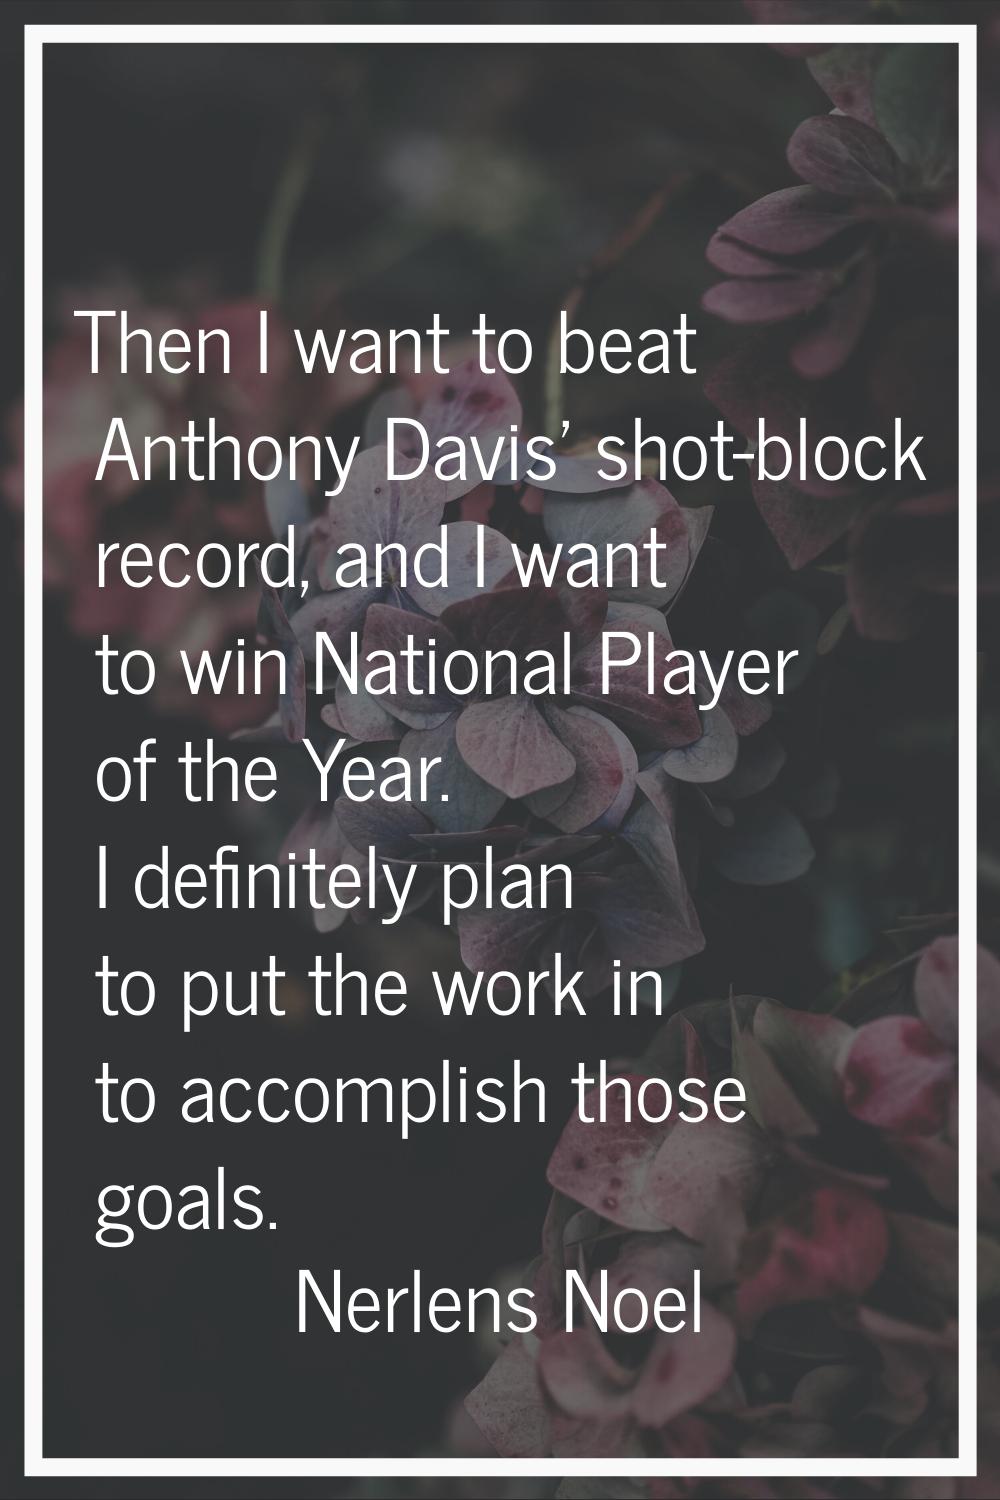 Then I want to beat Anthony Davis' shot-block record, and I want to win National Player of the Year